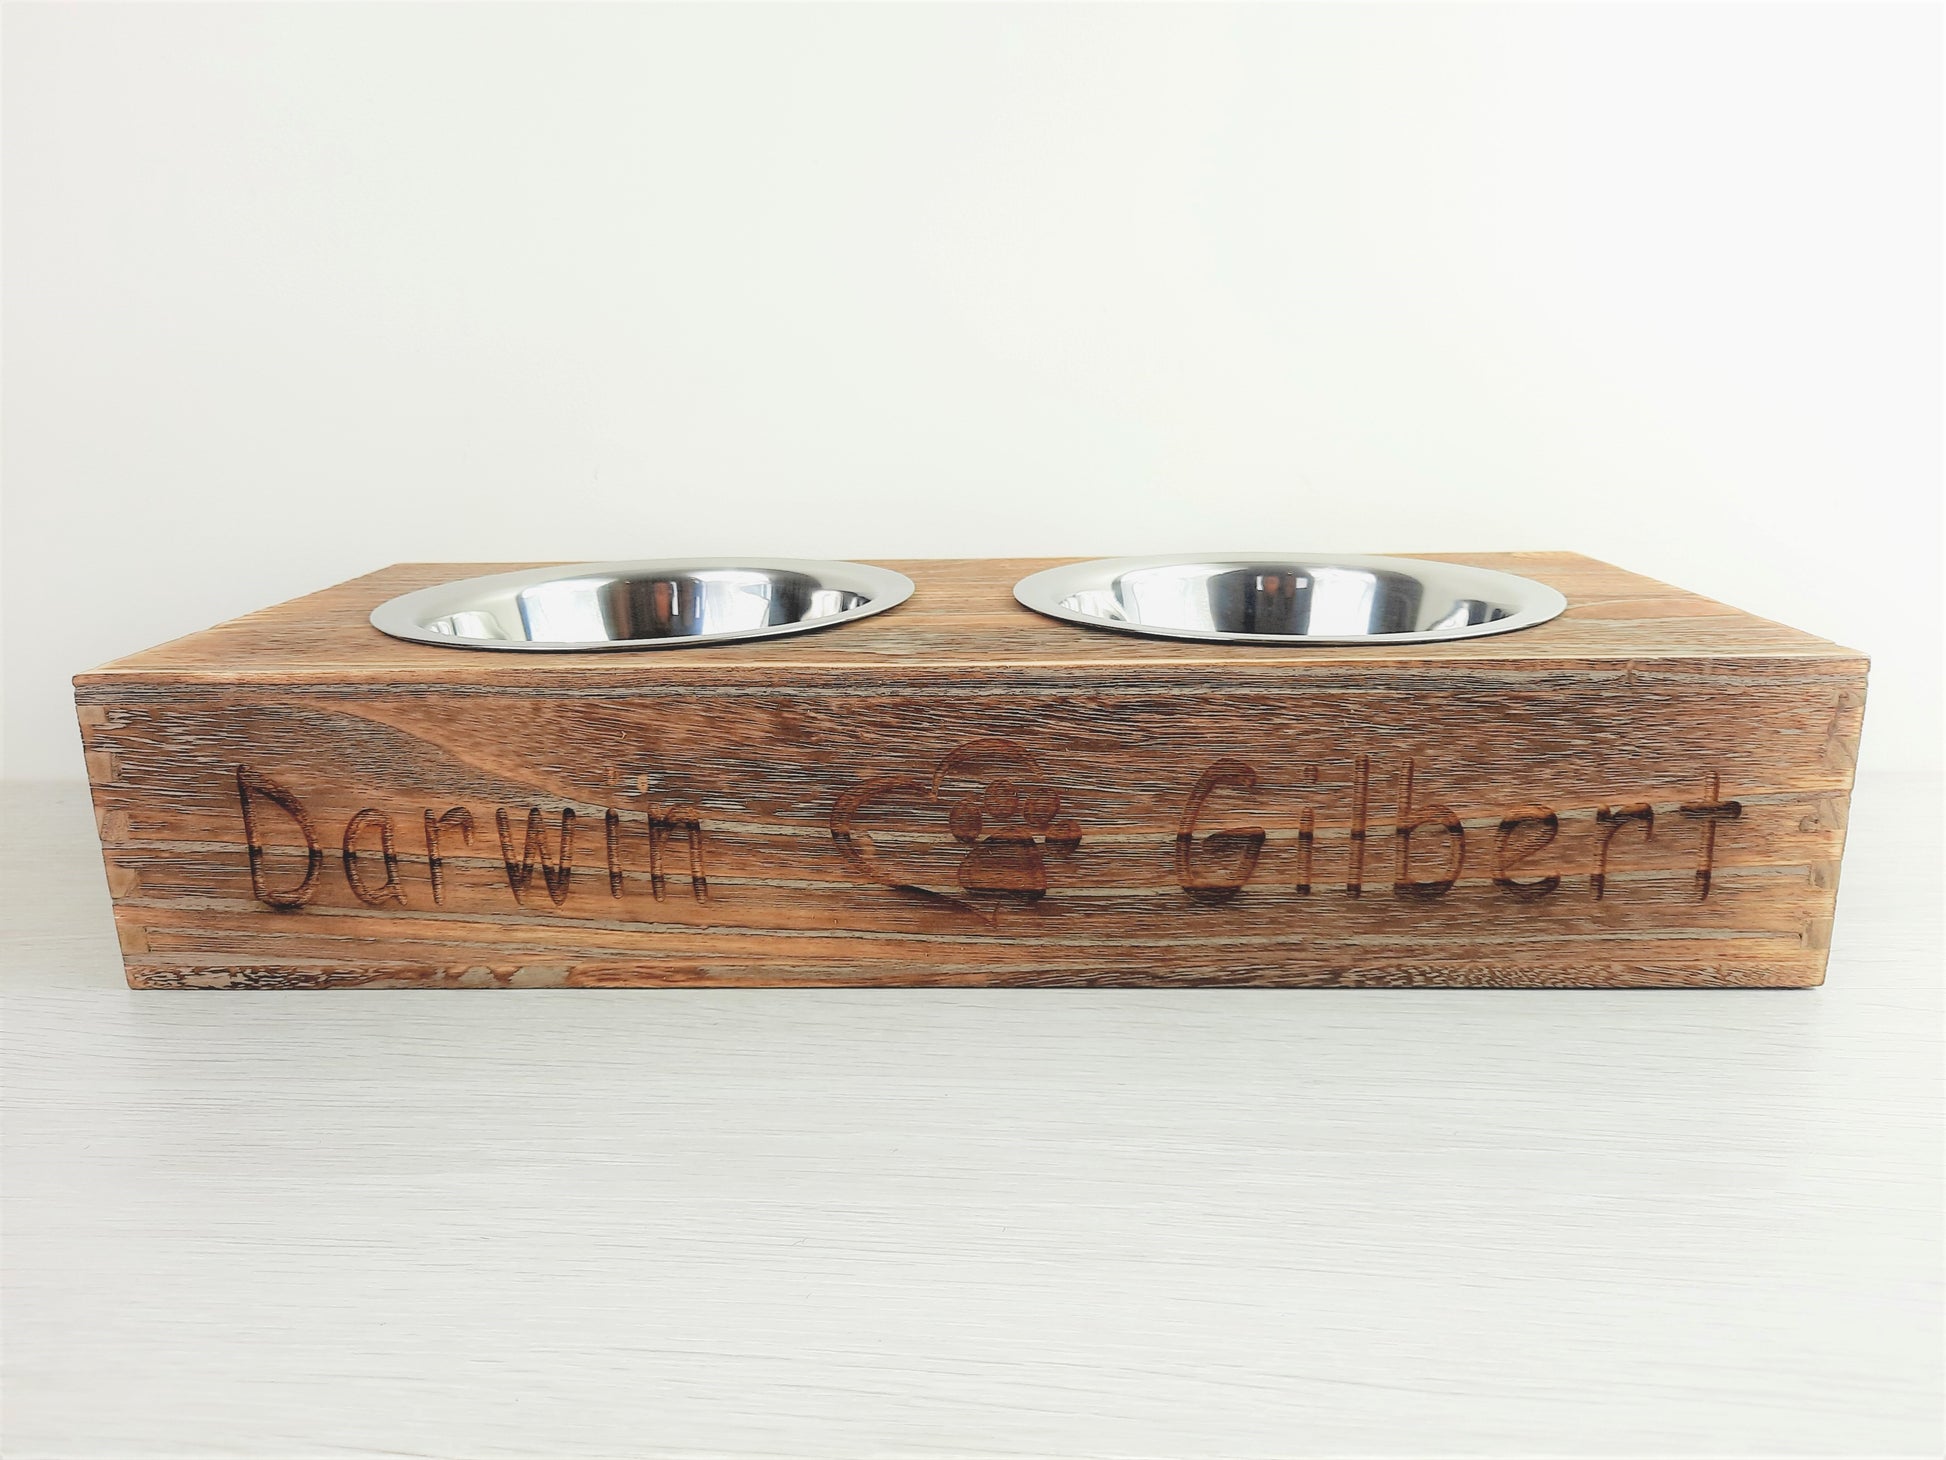 Personalised Pet Bowl Feeder Bamboo Wood with engraved 2 pet names that says "Darwin" Paw with heart icon " Gilbert".